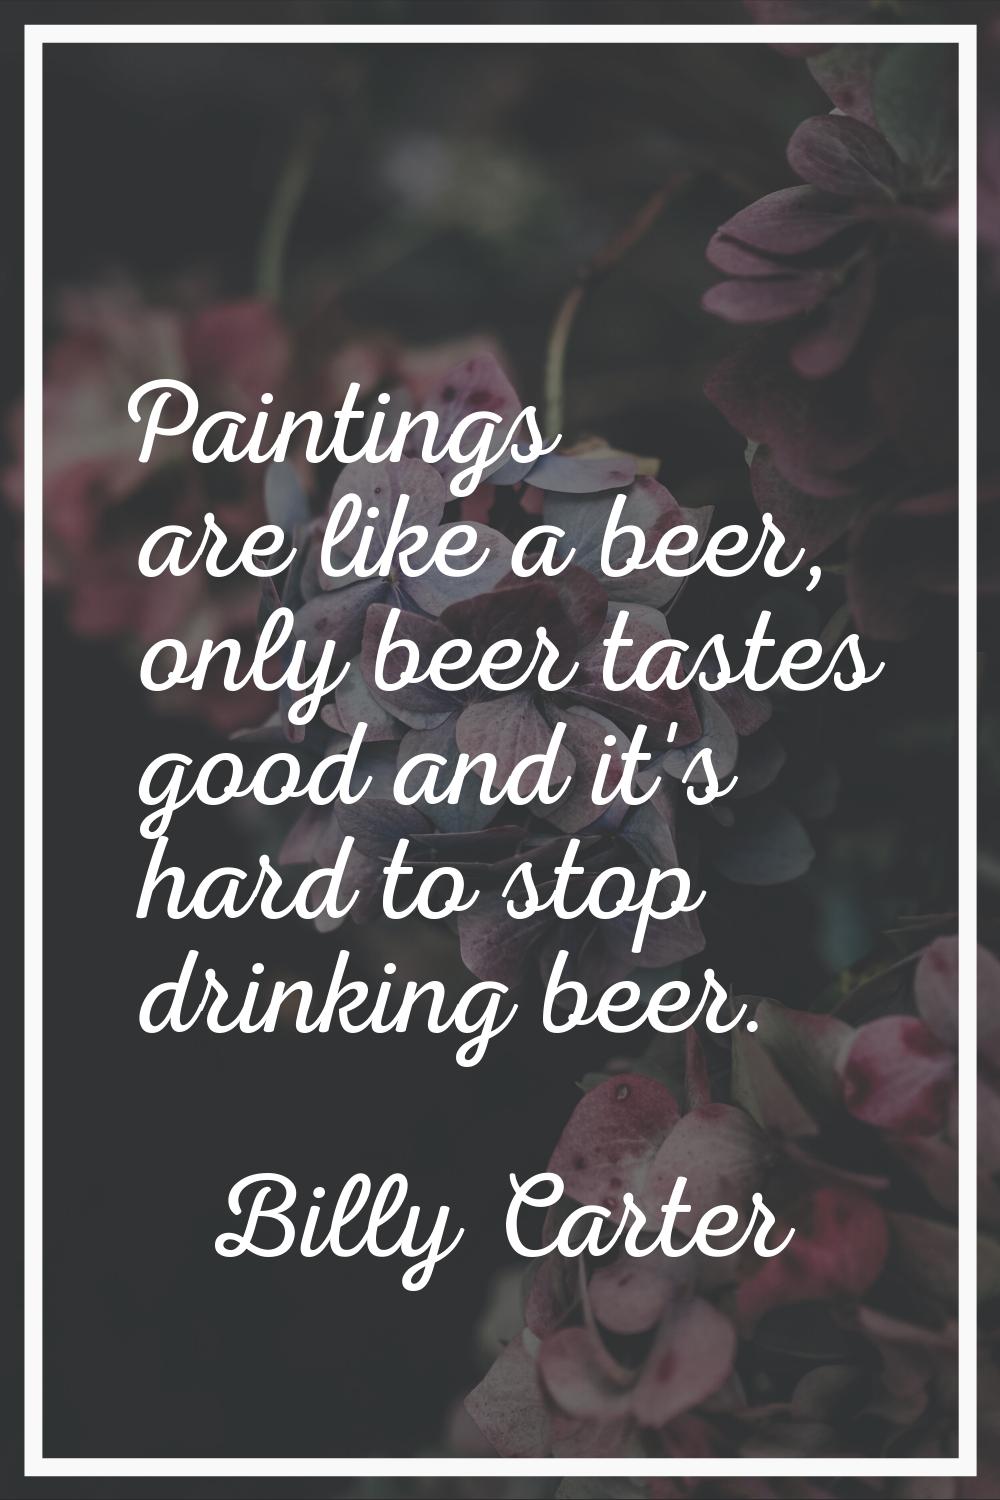 Paintings are like a beer, only beer tastes good and it's hard to stop drinking beer.